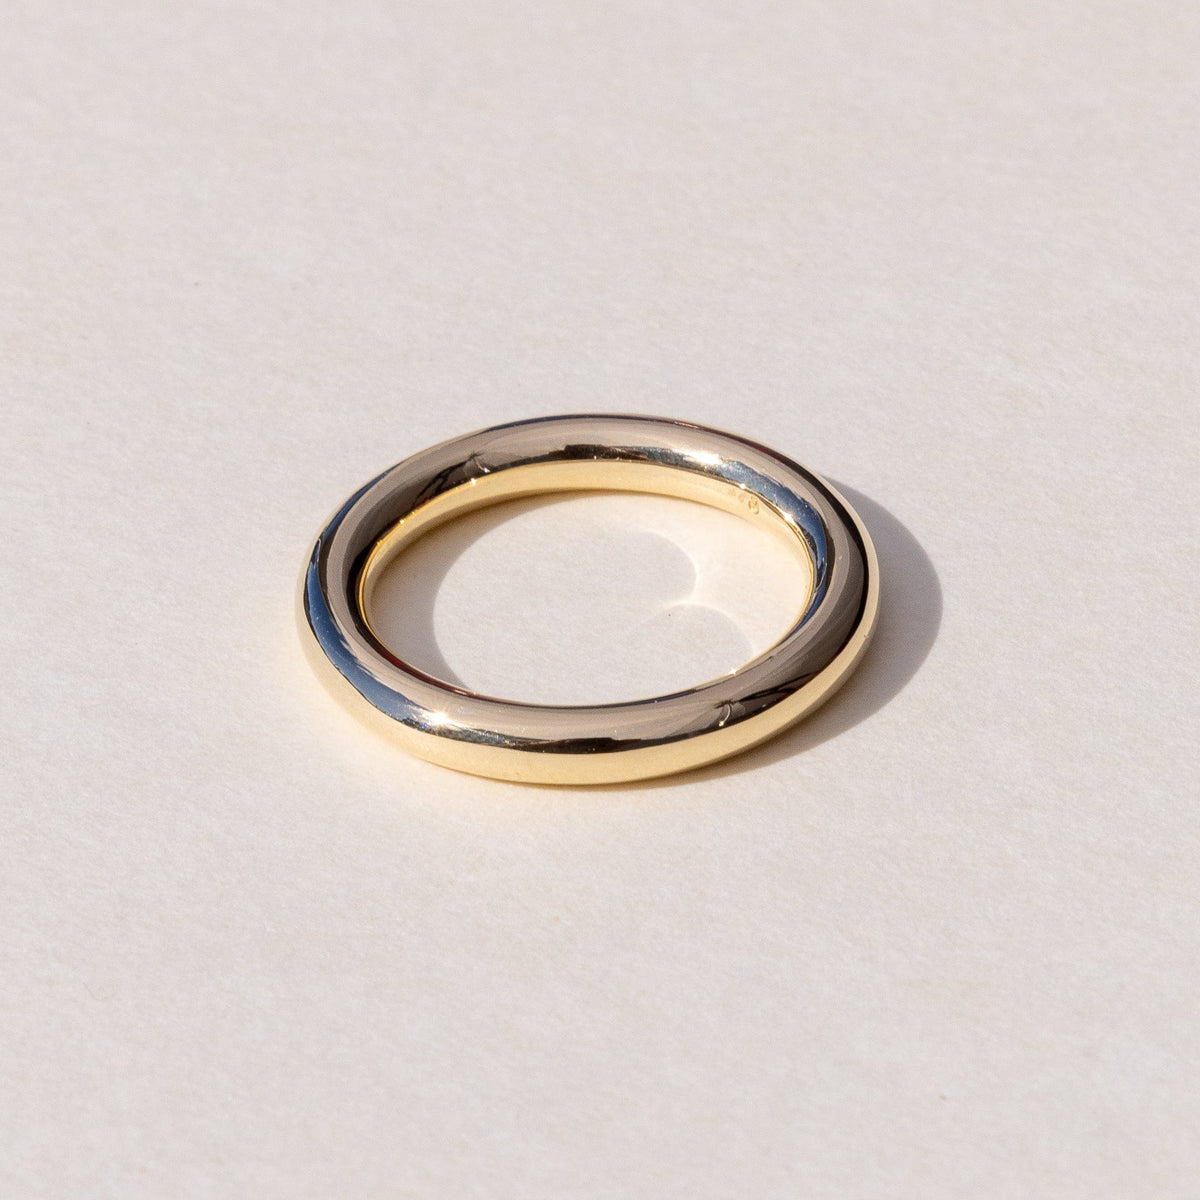 luxury bespoke solid gold ring handmade locally by our artisans